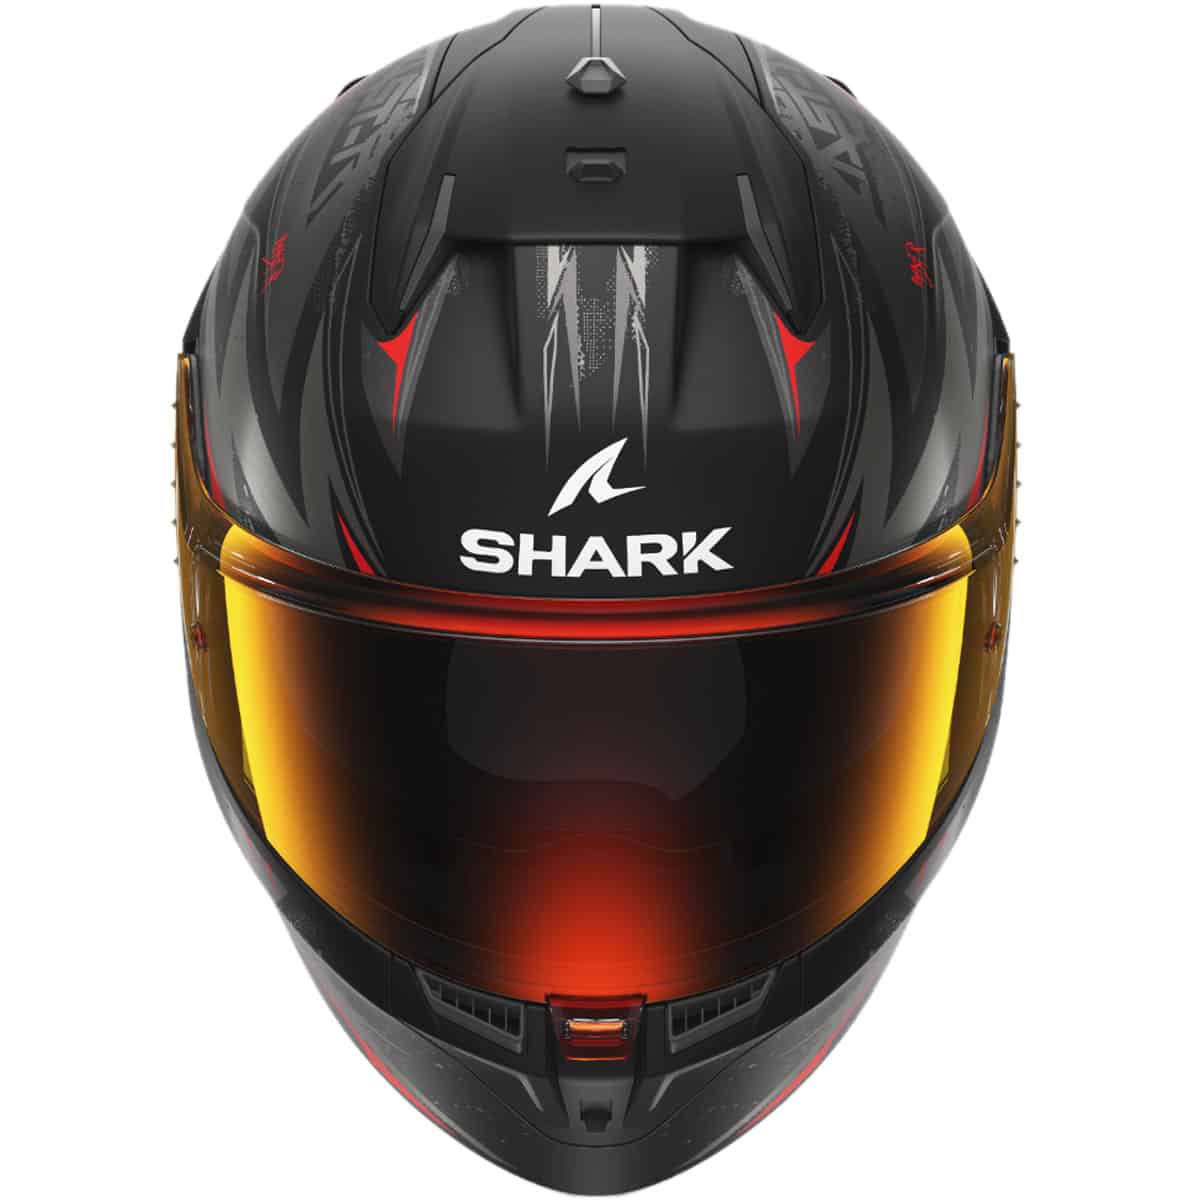 The Shark D-Skwal 3 helmet, the third-generation helmet in the D-SKWAL series, combines an aggressive look with exceptional new features. - front view